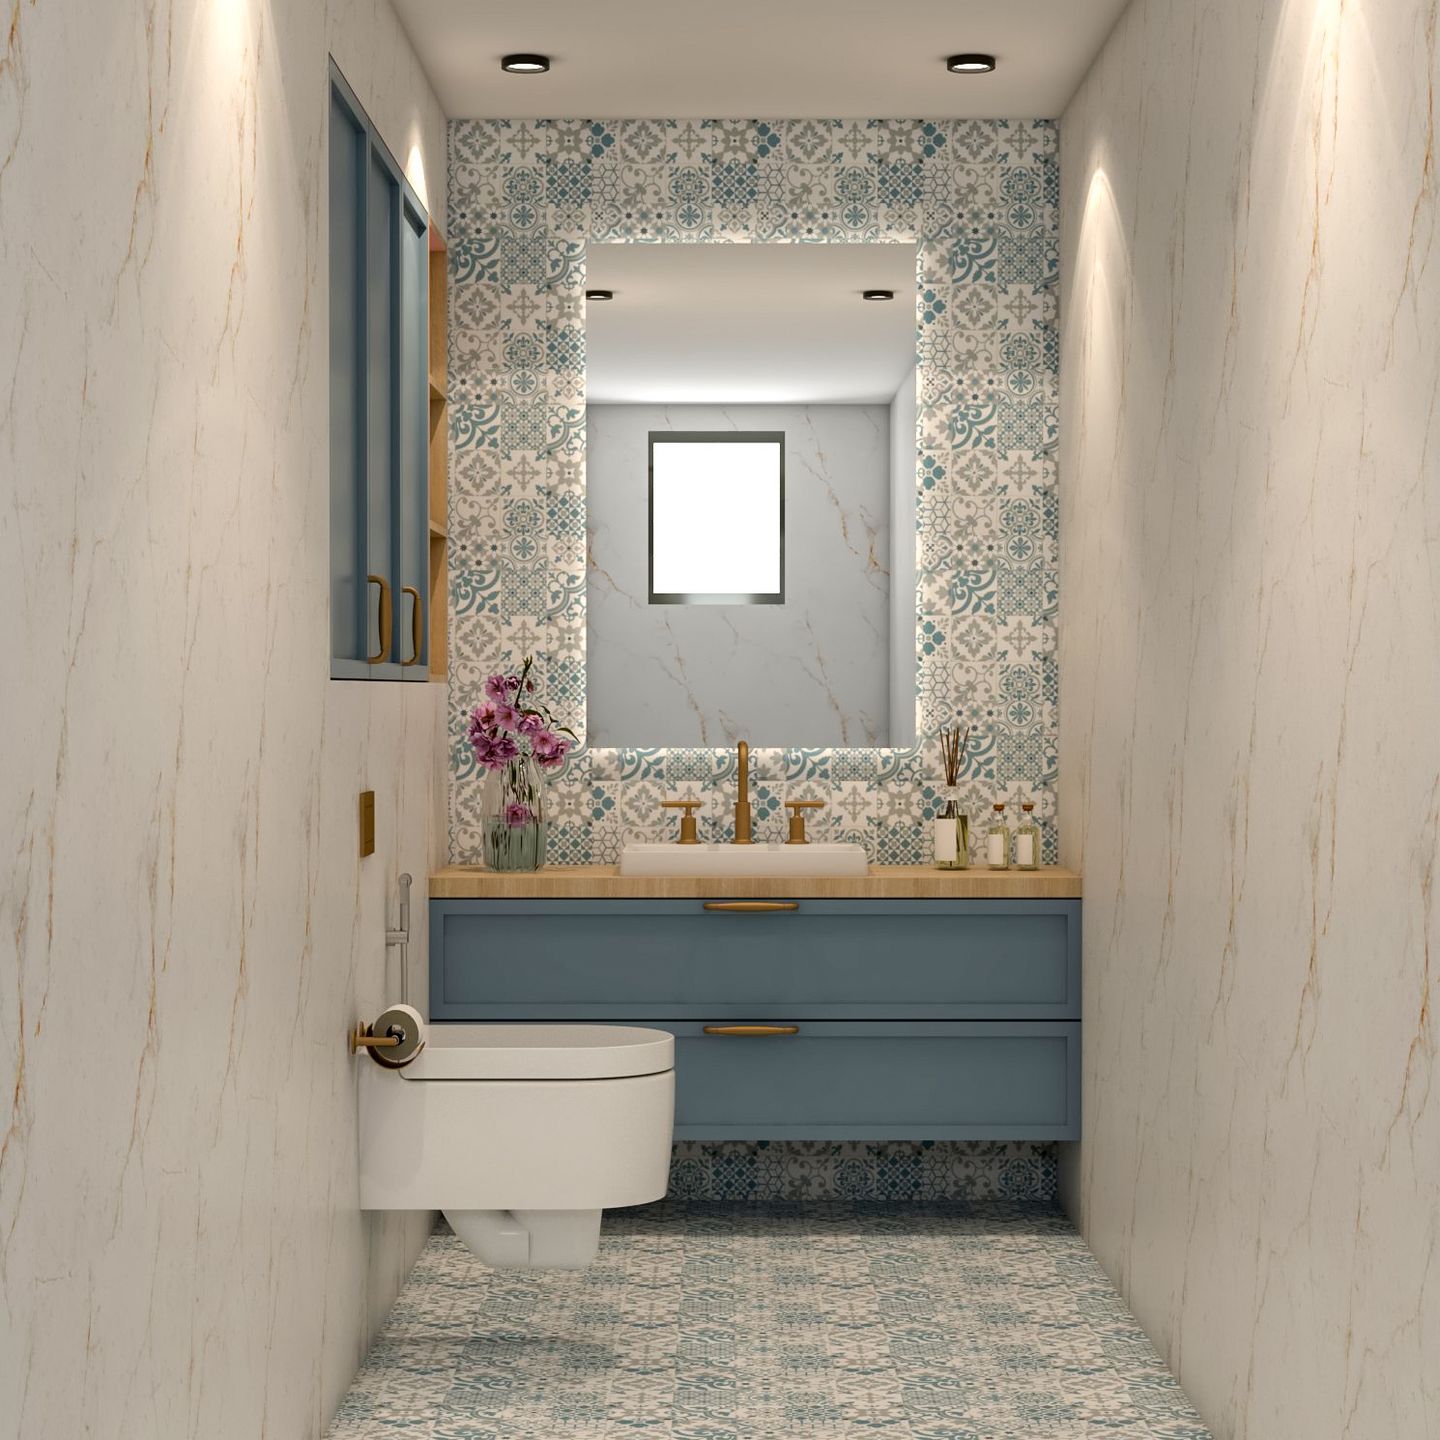 Classic Bathroom With Blue Vanity Unit, Wooden Countertop, Rectangular Mirror And Ornate Blue And White Wallpaper - Livspace